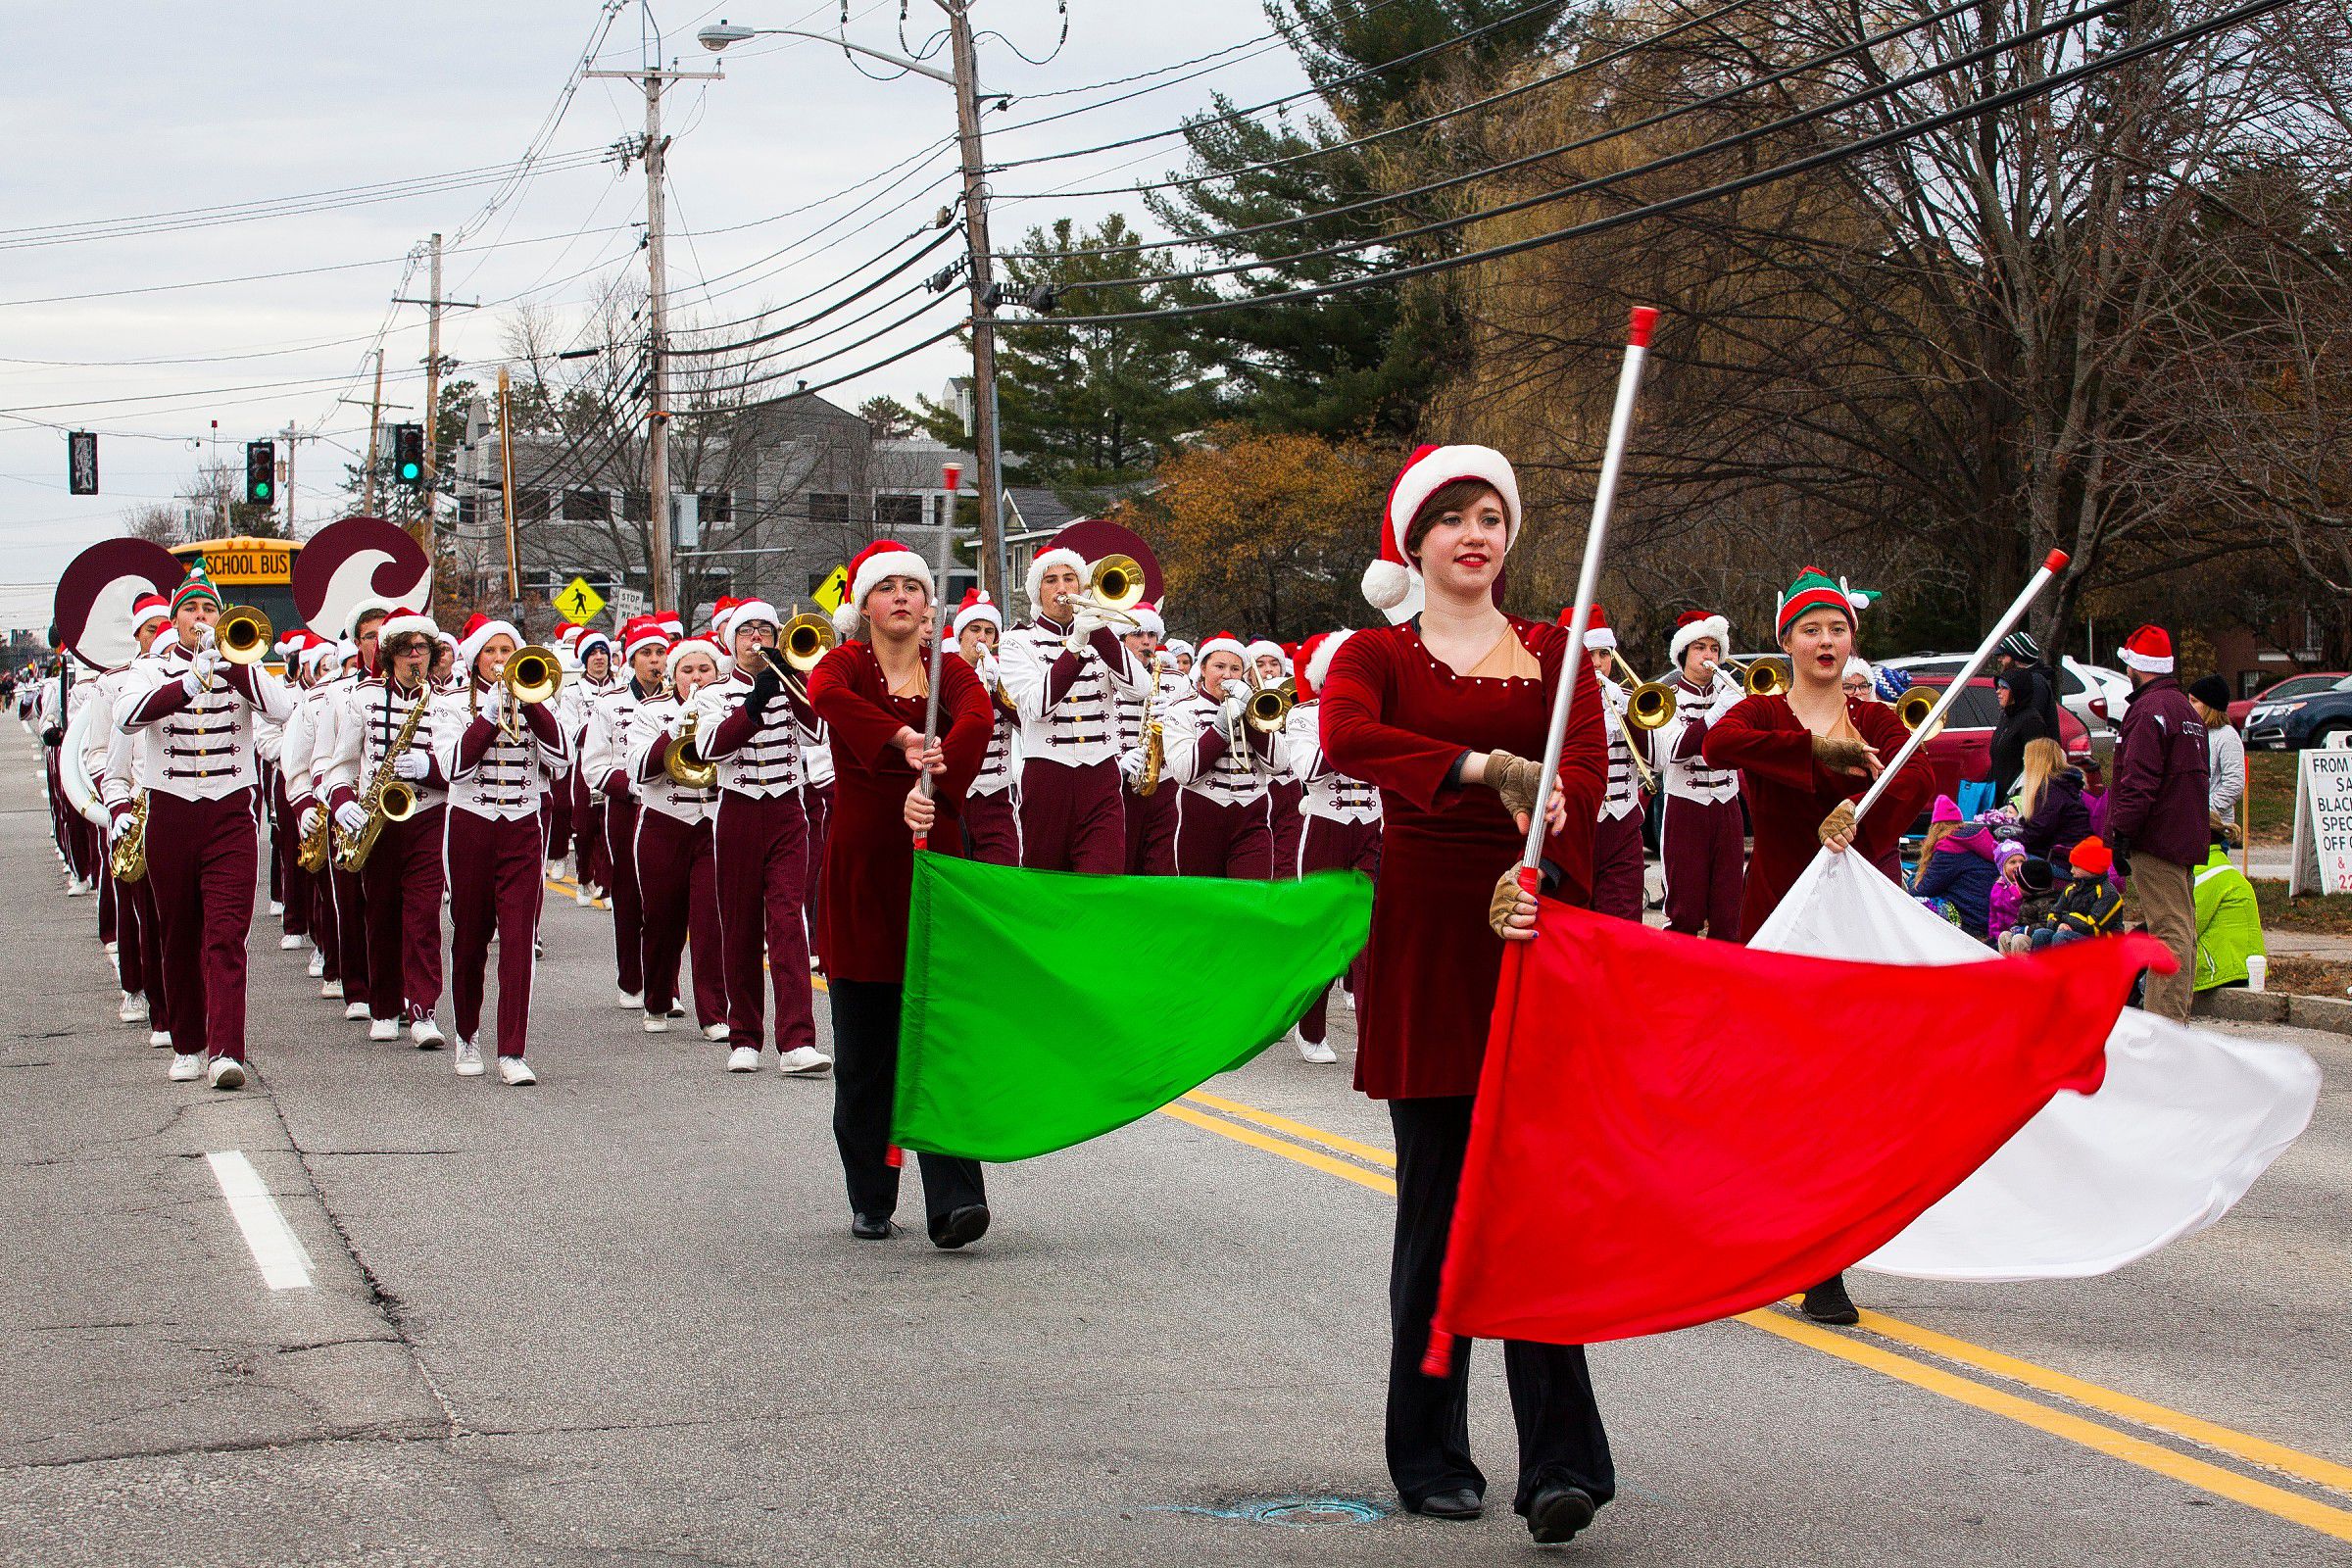 The Concord High School marching band and color guard walk in the annual Christmas parade on the Heights on Saturday, Nov. 22, 2014.  (ELIZABETH FRANTZ / Monitor staff) ELIZABETH FRANTZ